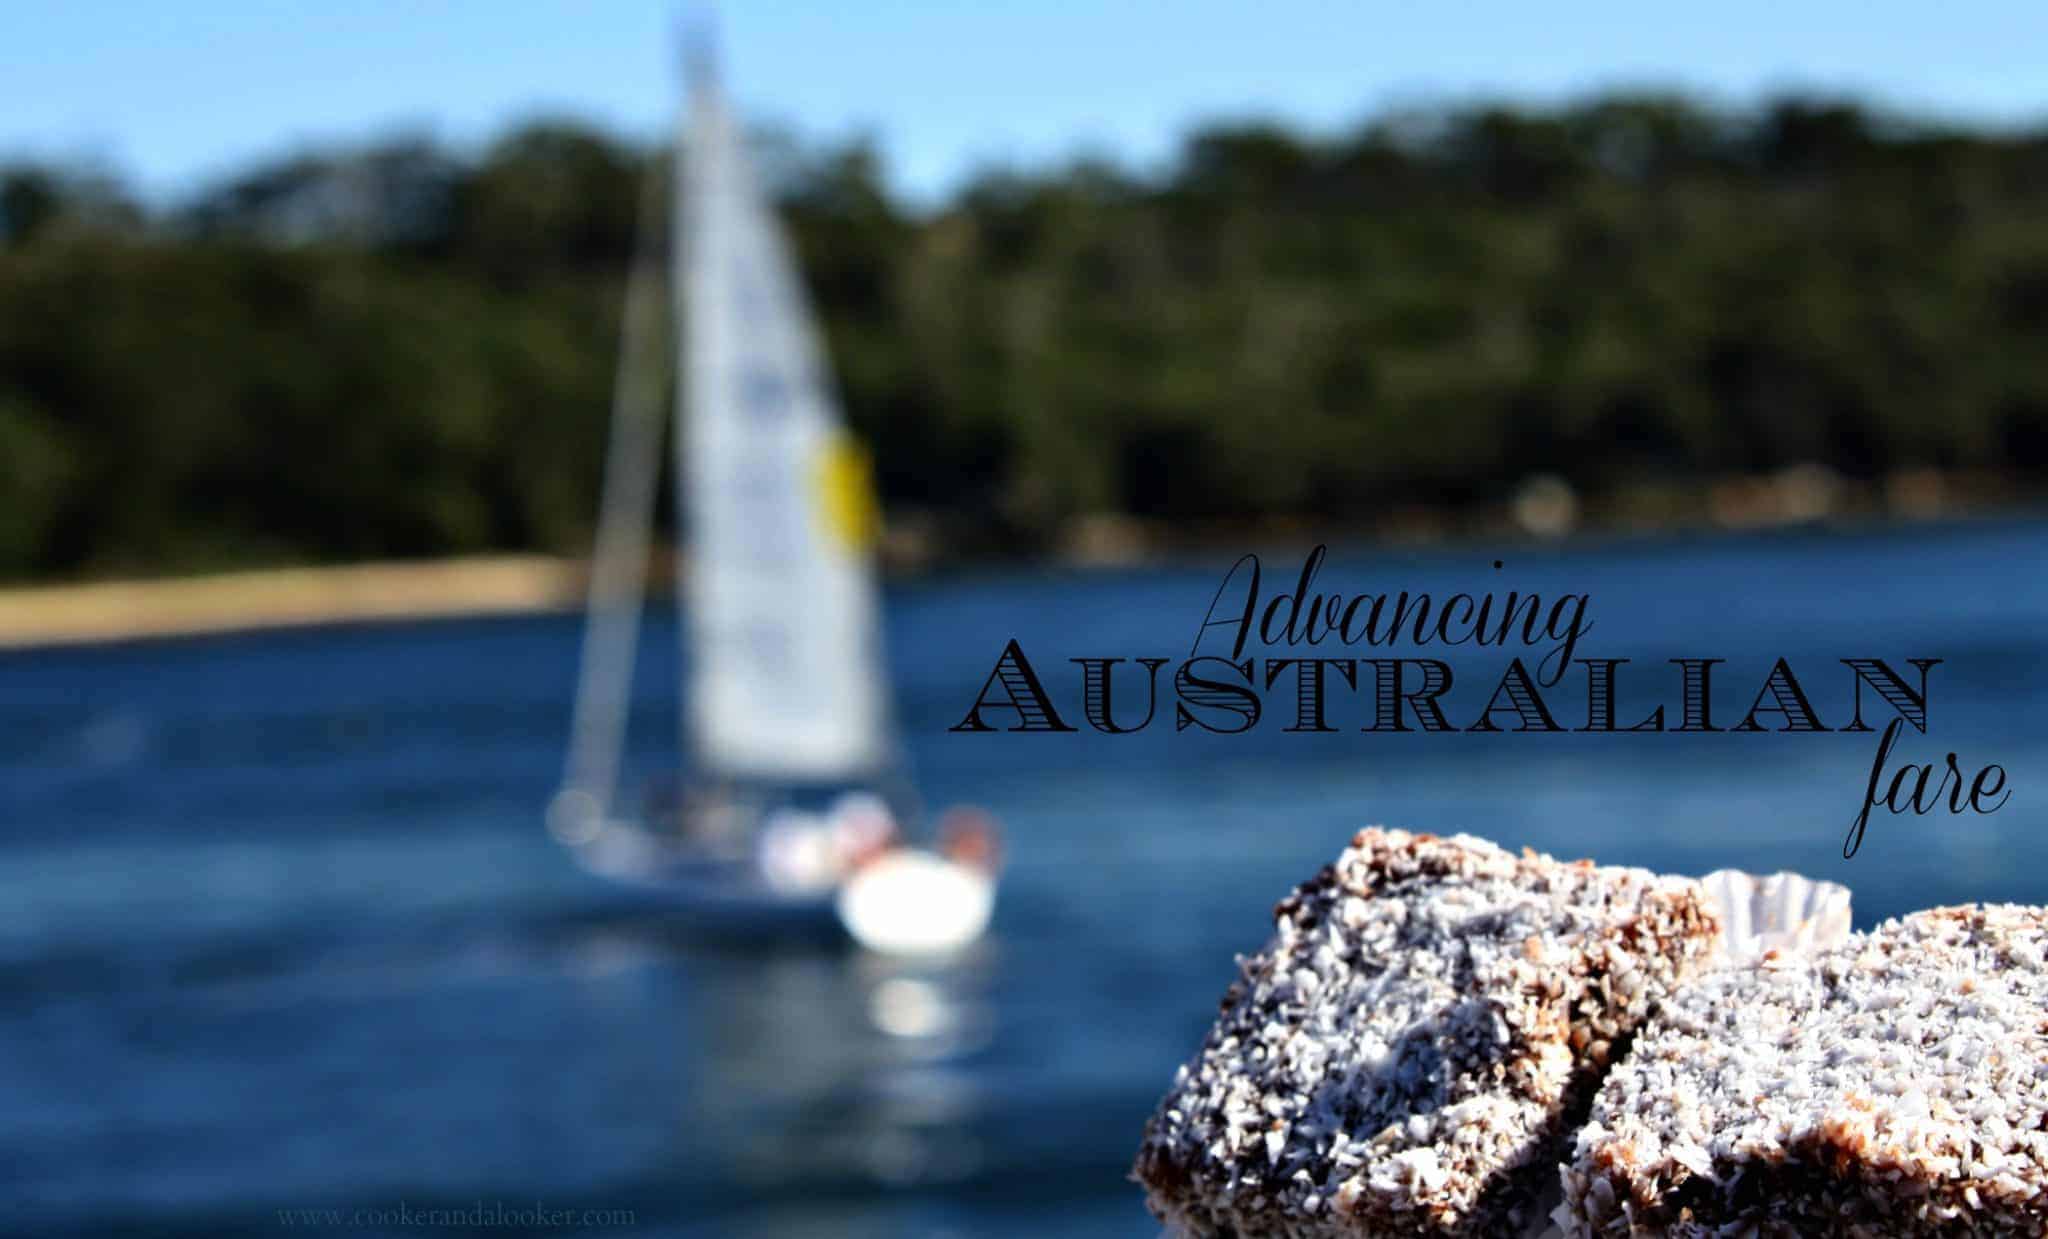 lamingtons, sydney harbour, yacht, cooker and a looker